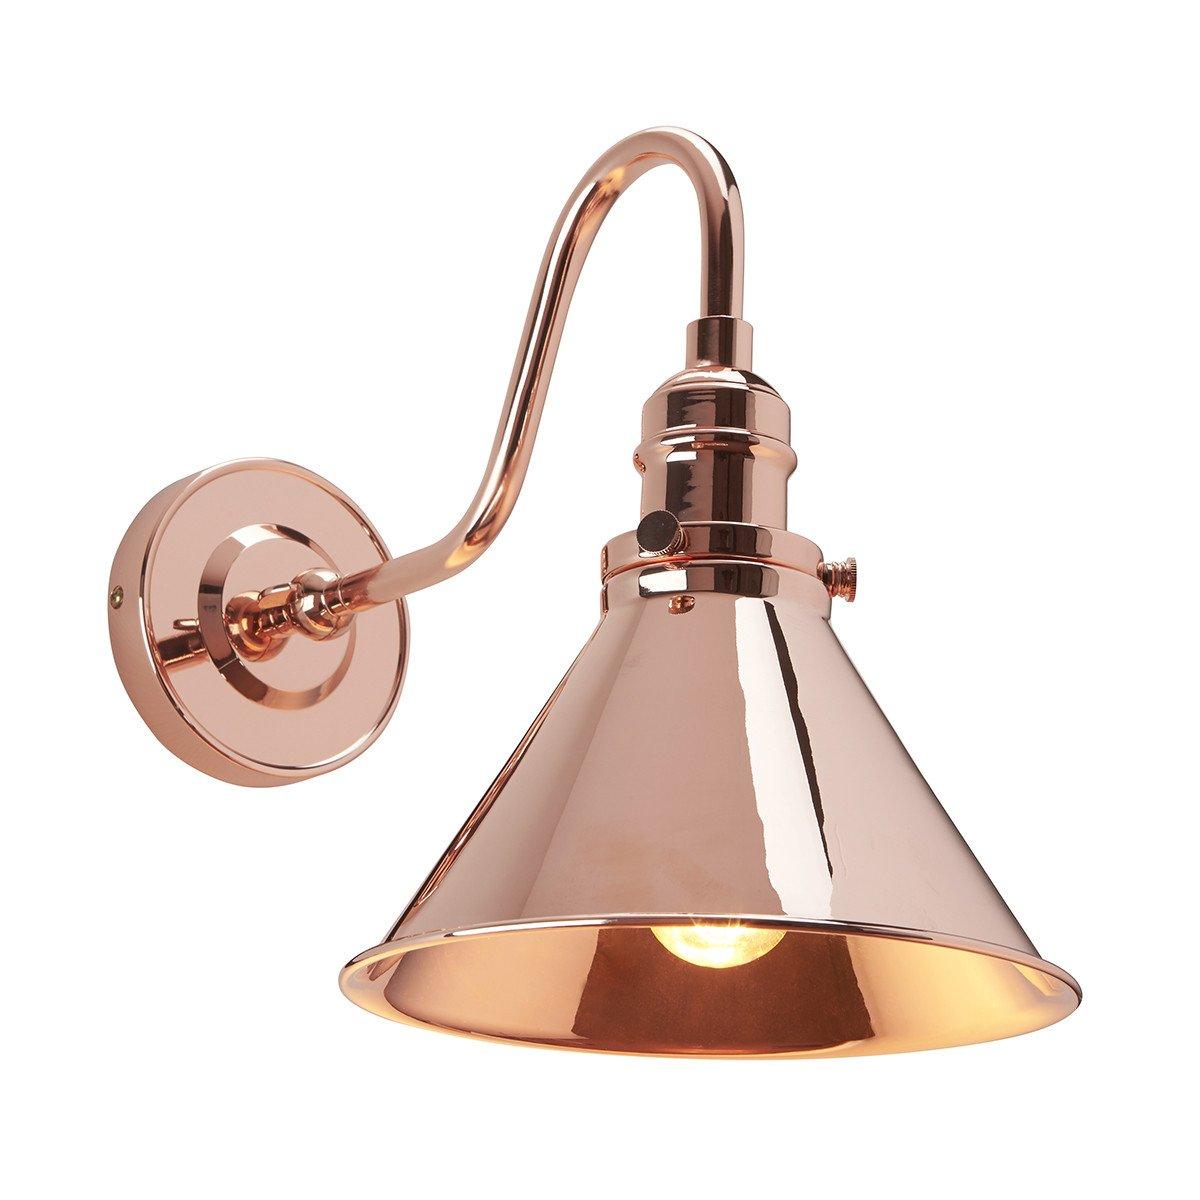 Provence 1 Light Indoor Dome Wall Lamp Polished Copper E27